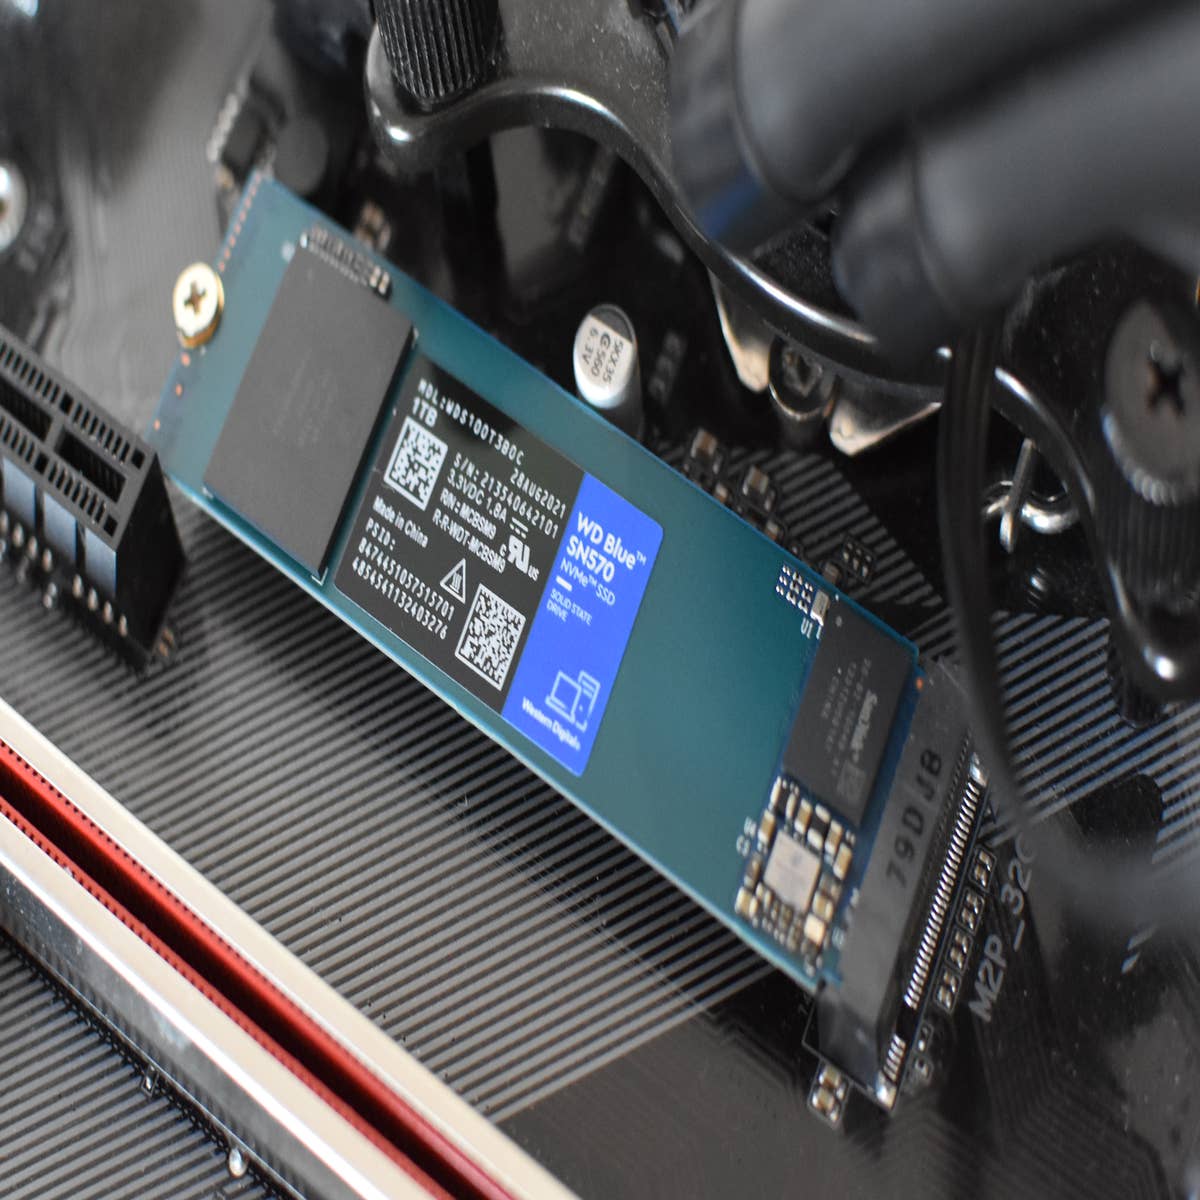 SSD vs. HDD: Do SSD drives give you higher frame rates in games?